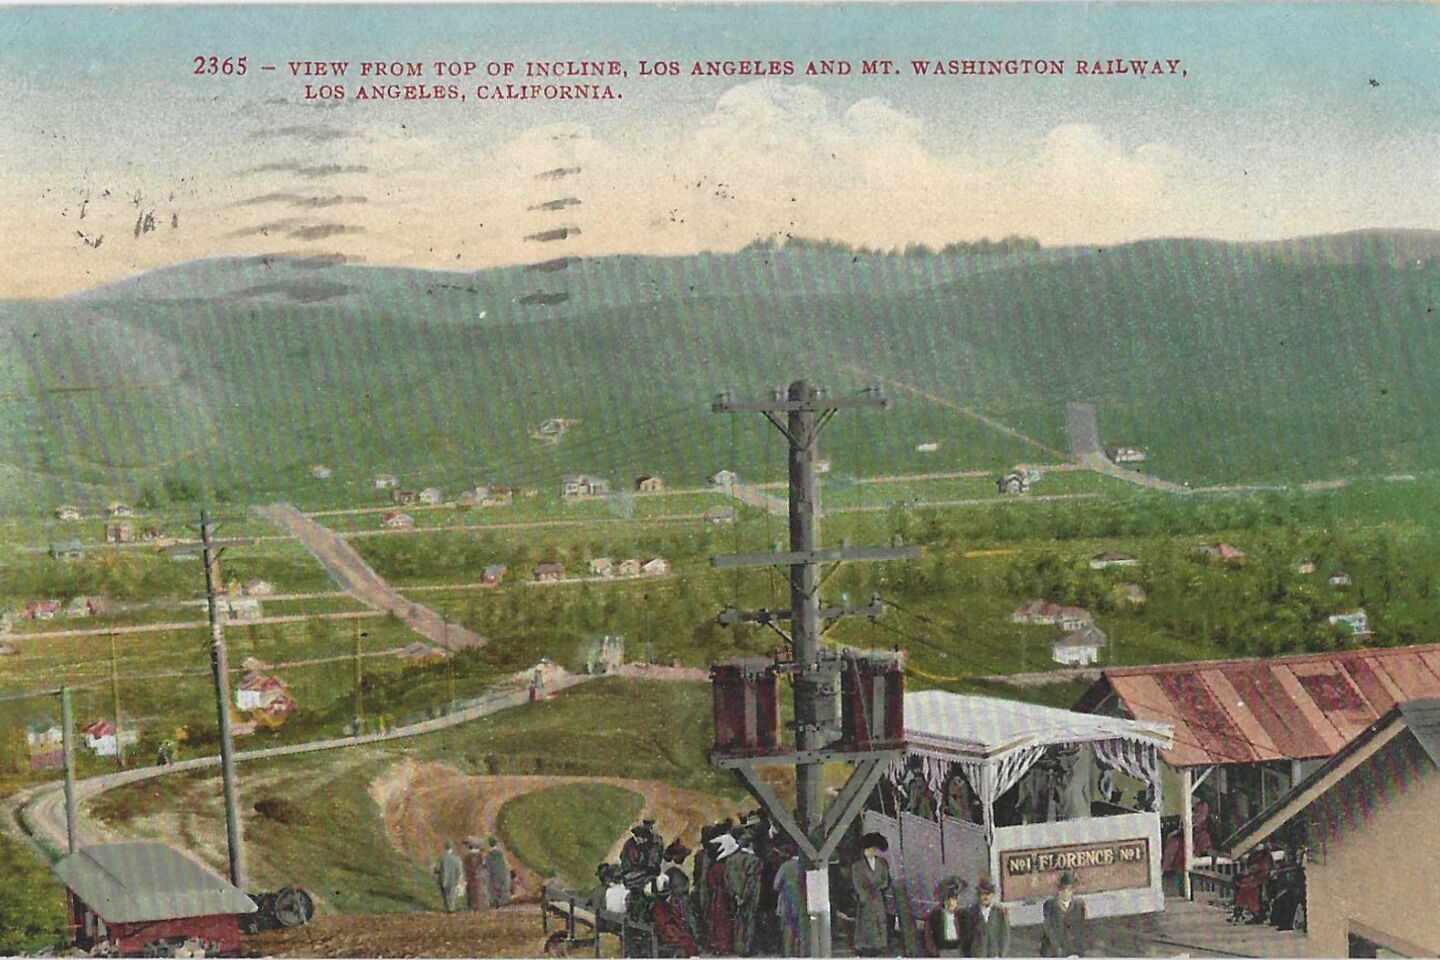 From the top of the Mount Washington rail incline, passengers could see the hills and city below. The cars were said to stop wherever residents wanted to alight.